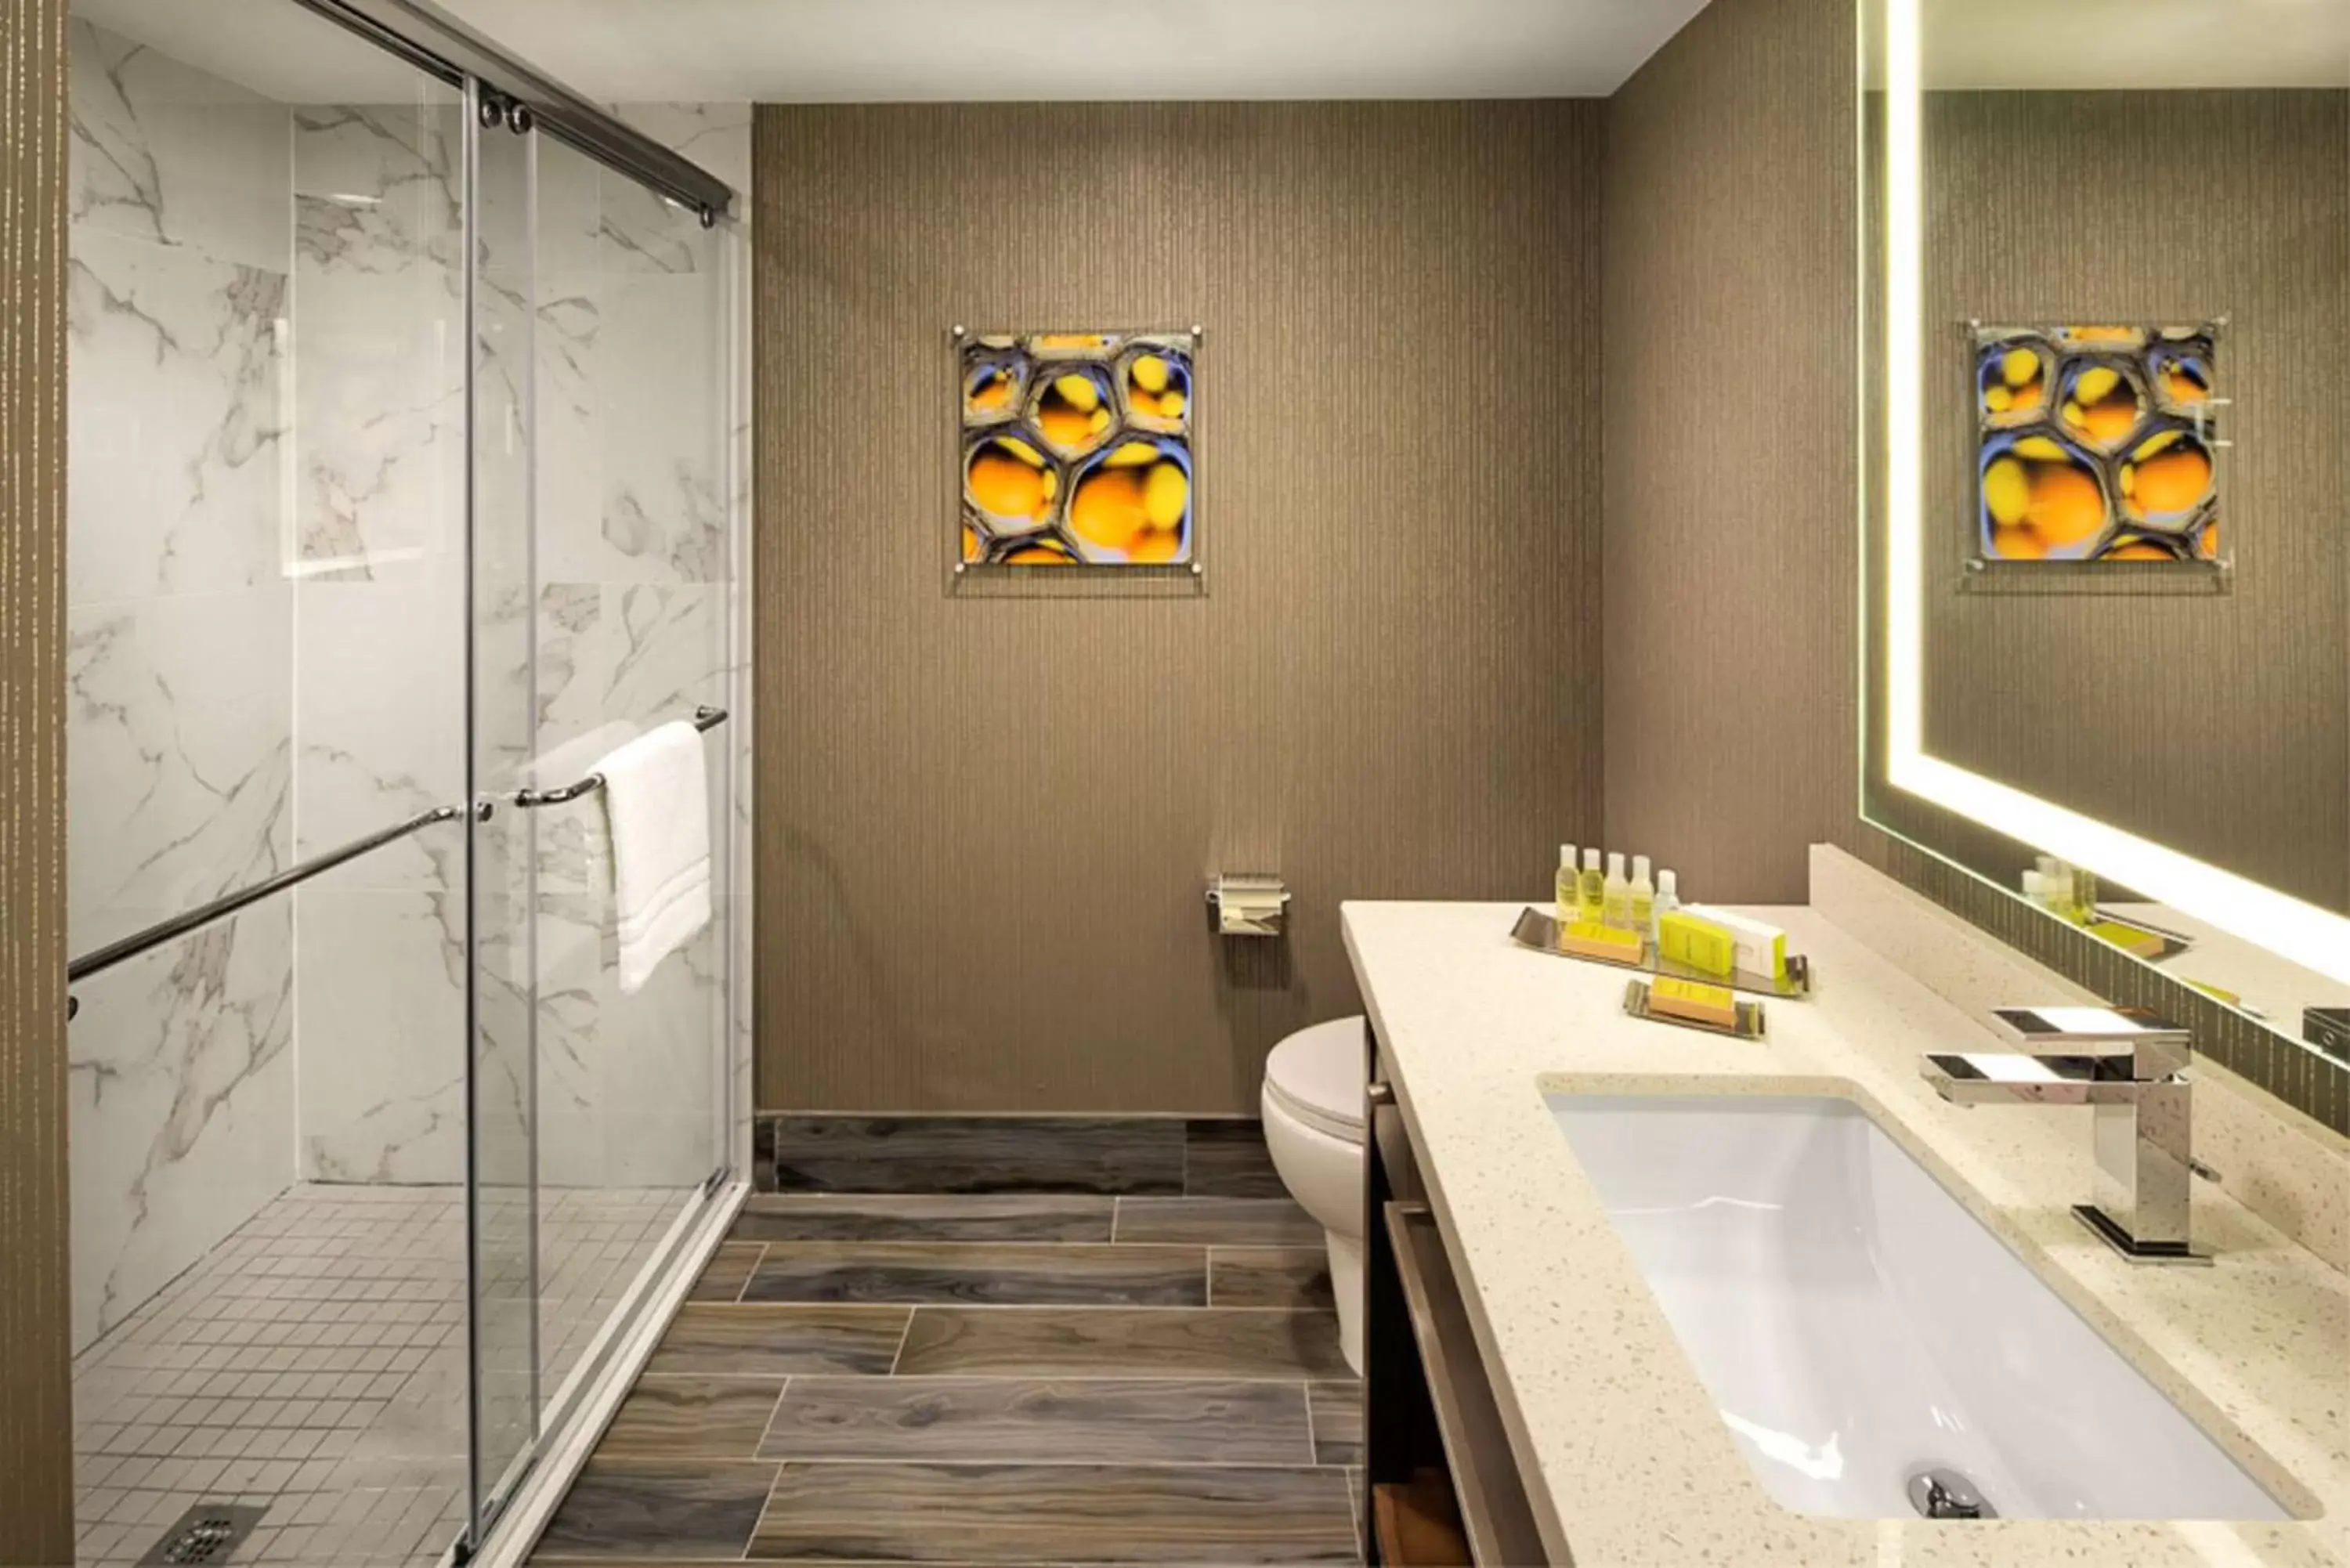 Bathroom in Doubletree by Hilton Toronto Airport, ON